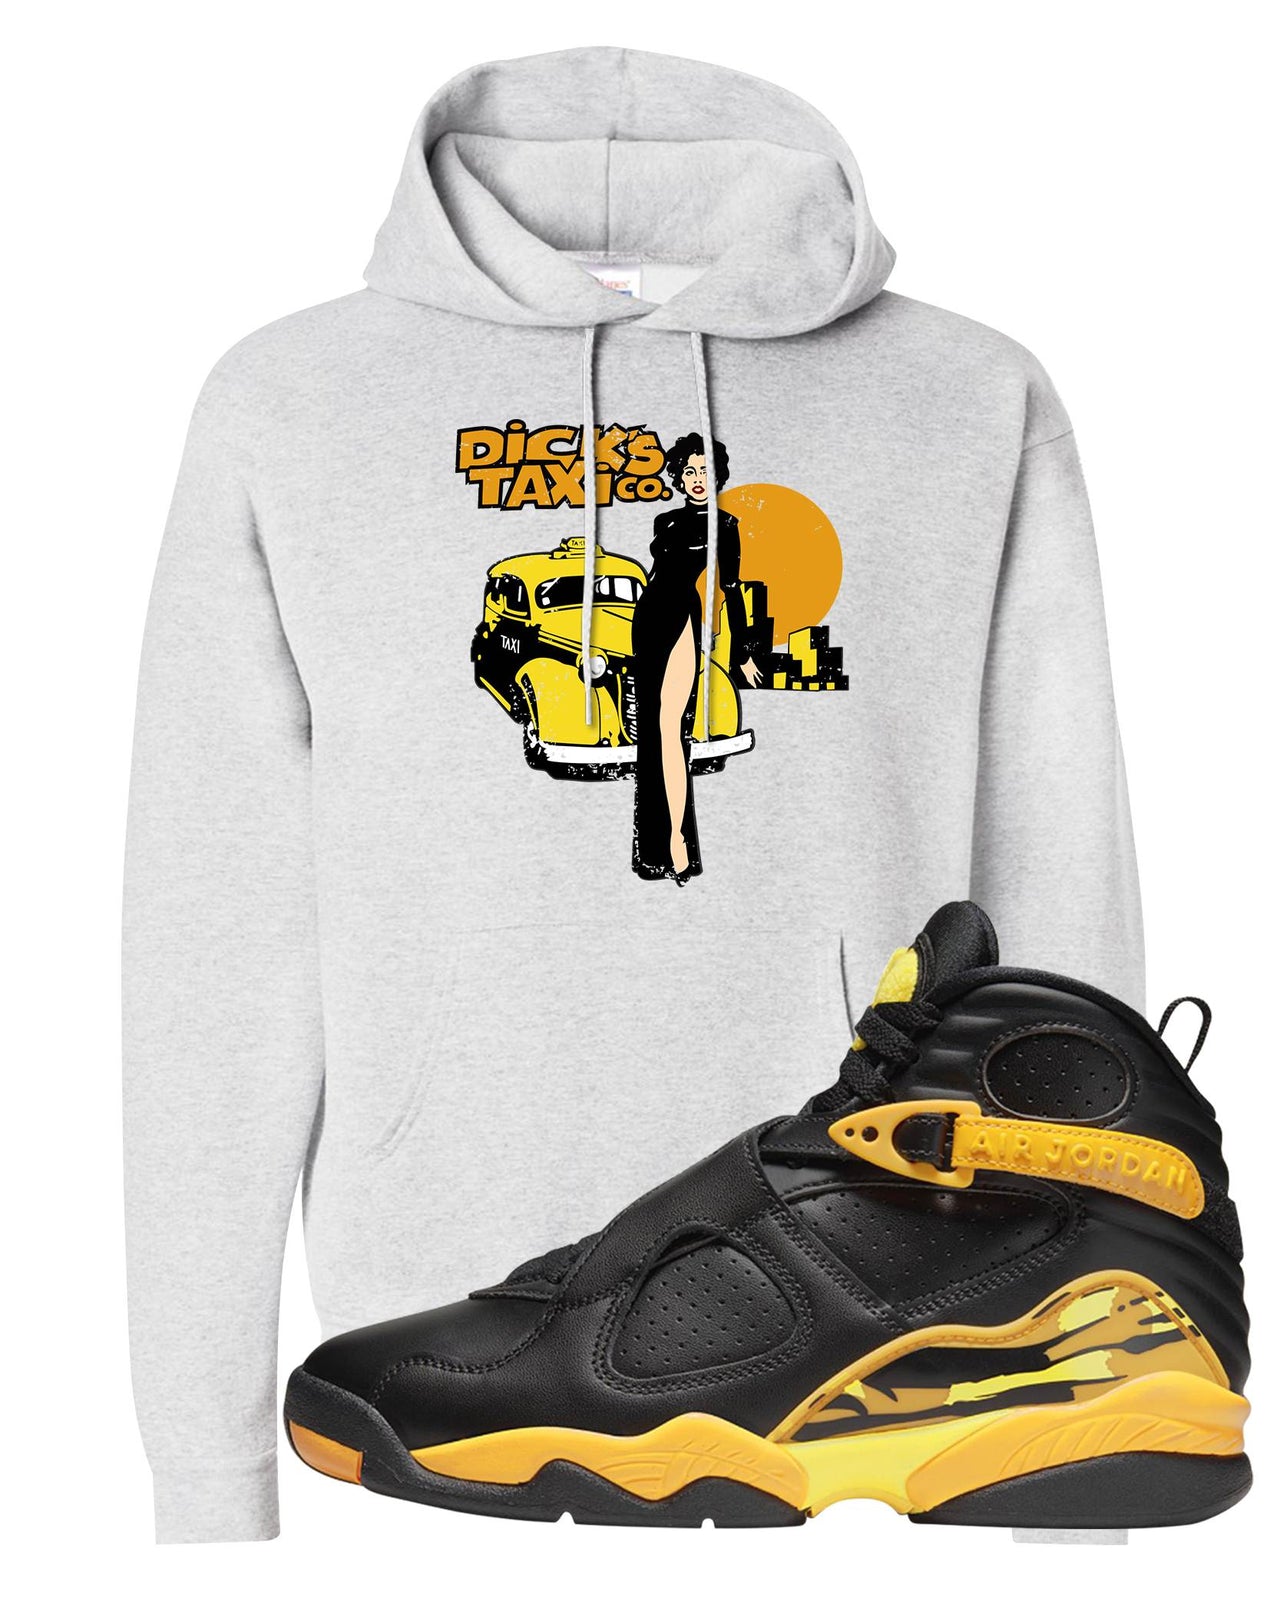 Taxi 8s Hoodie | Dick's Taxi Co., Ash